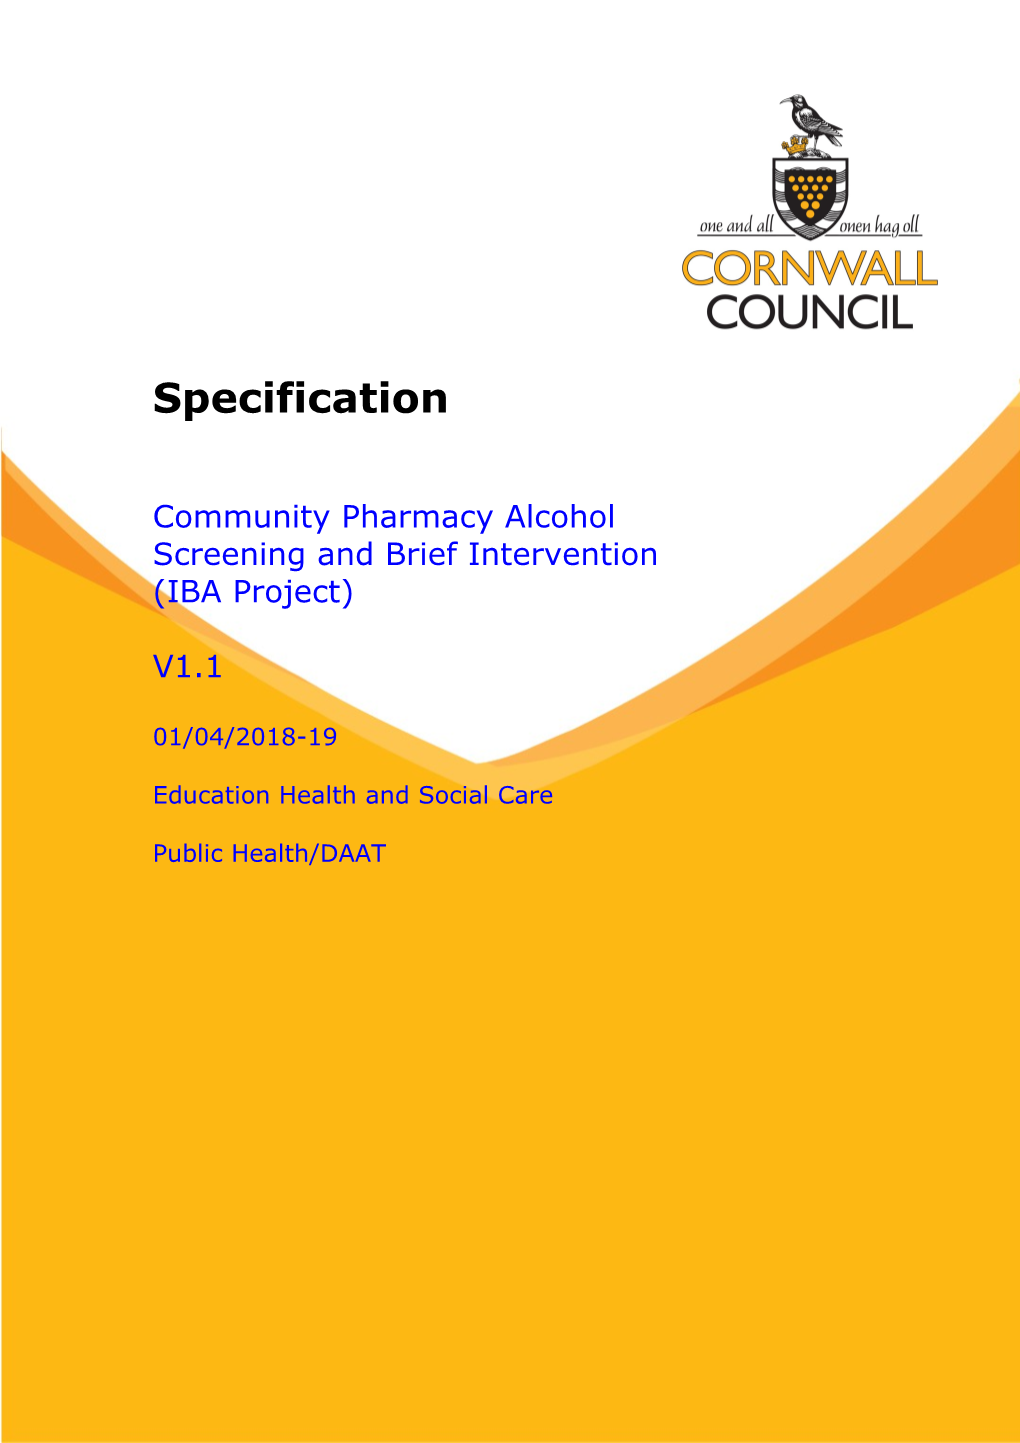 Specification for Community Pharmacy Alcohol Screening and Brief Intervention (IBA Project)